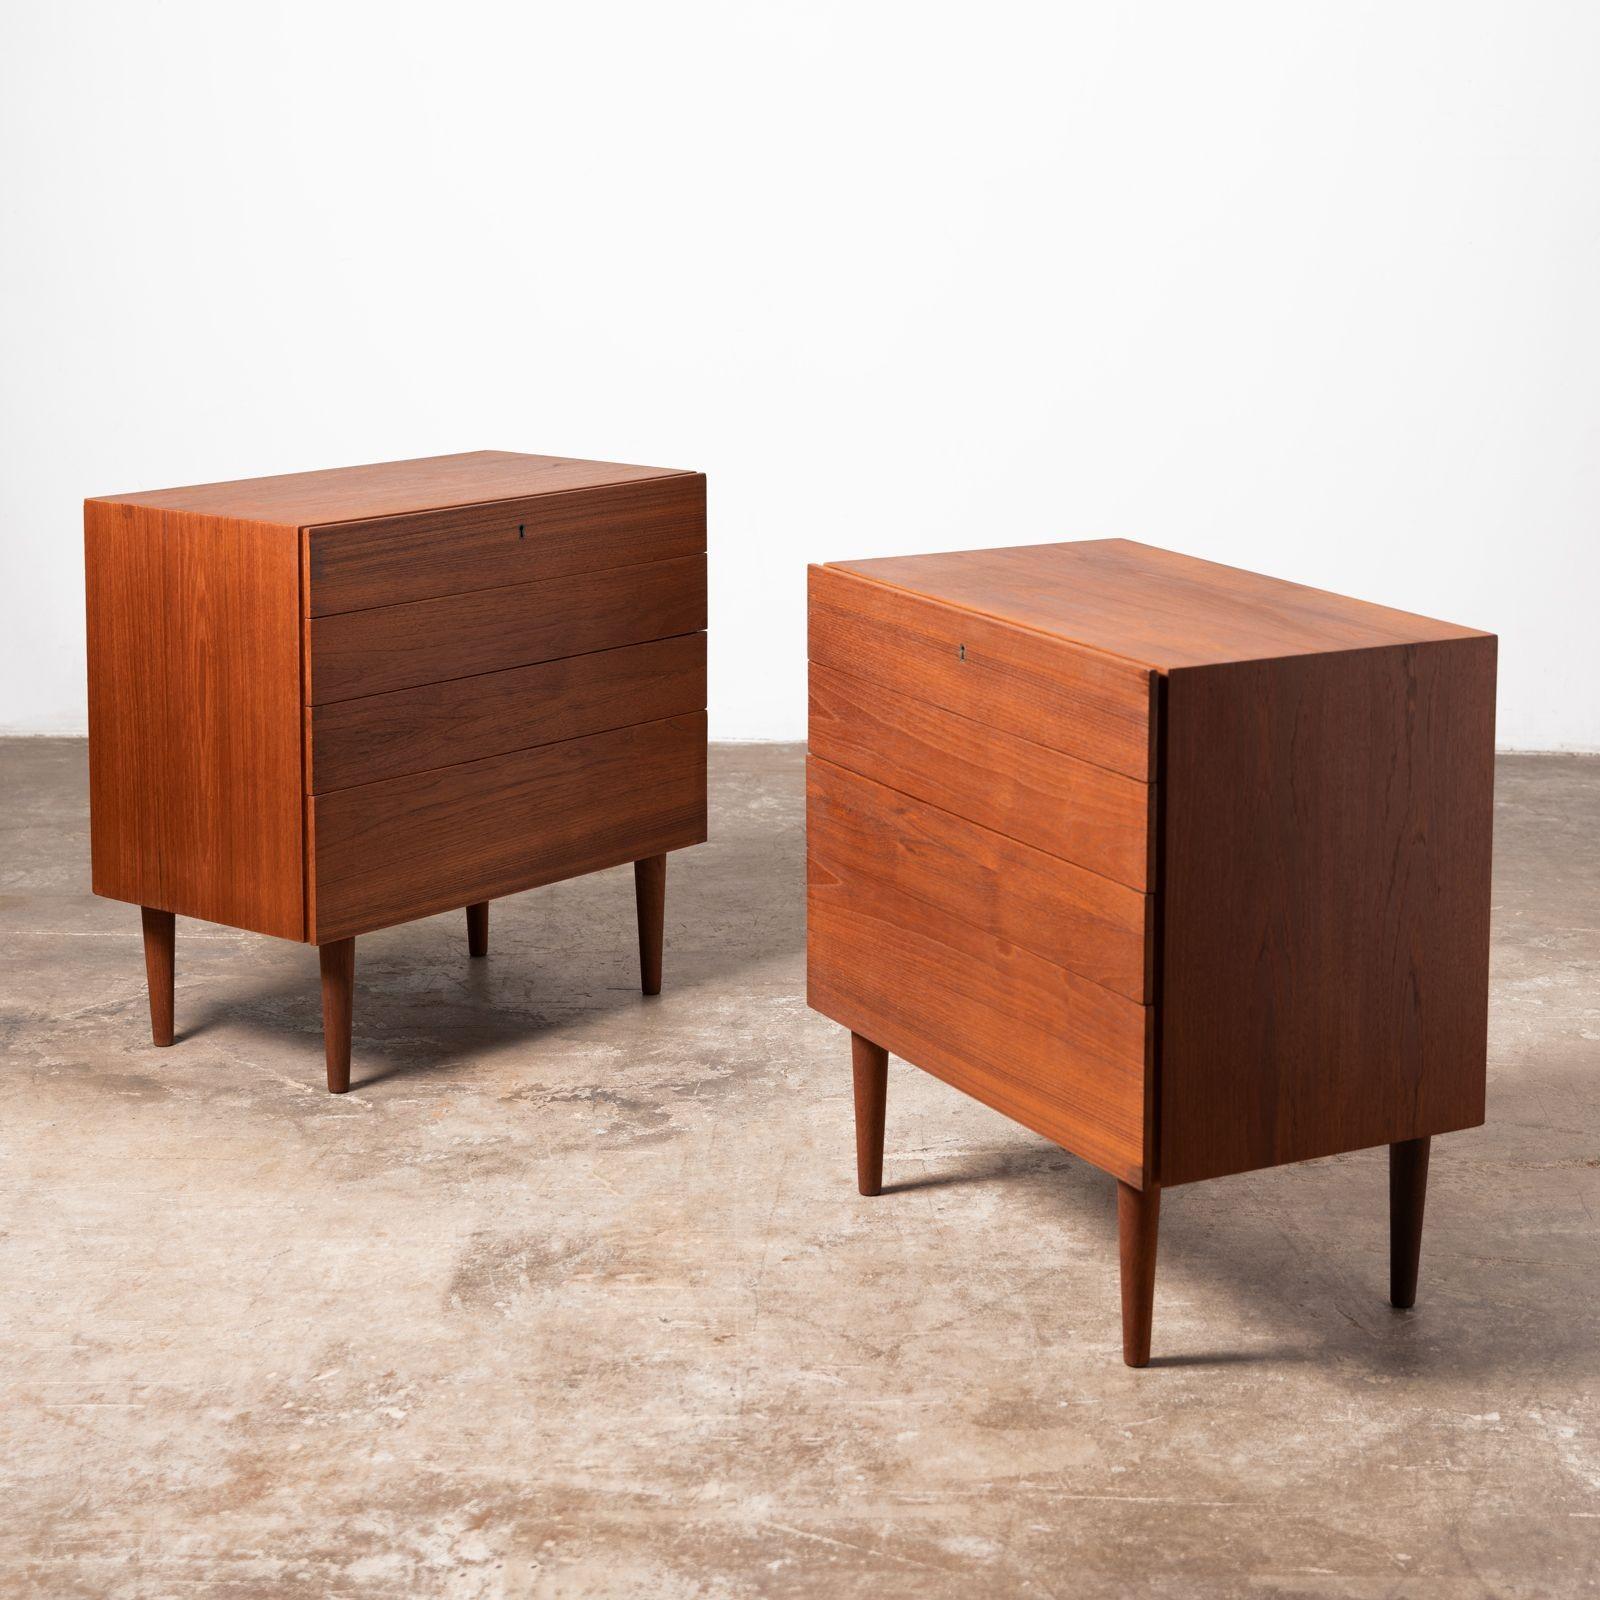 1960s Scandinavian modern chests or nightstands in teak wood with a satin lacquer finish. Beautiful minimalist form with elegant tapered legs. The drawers have a recessed reveal on the sides to open them and enable them top be free of ornamental